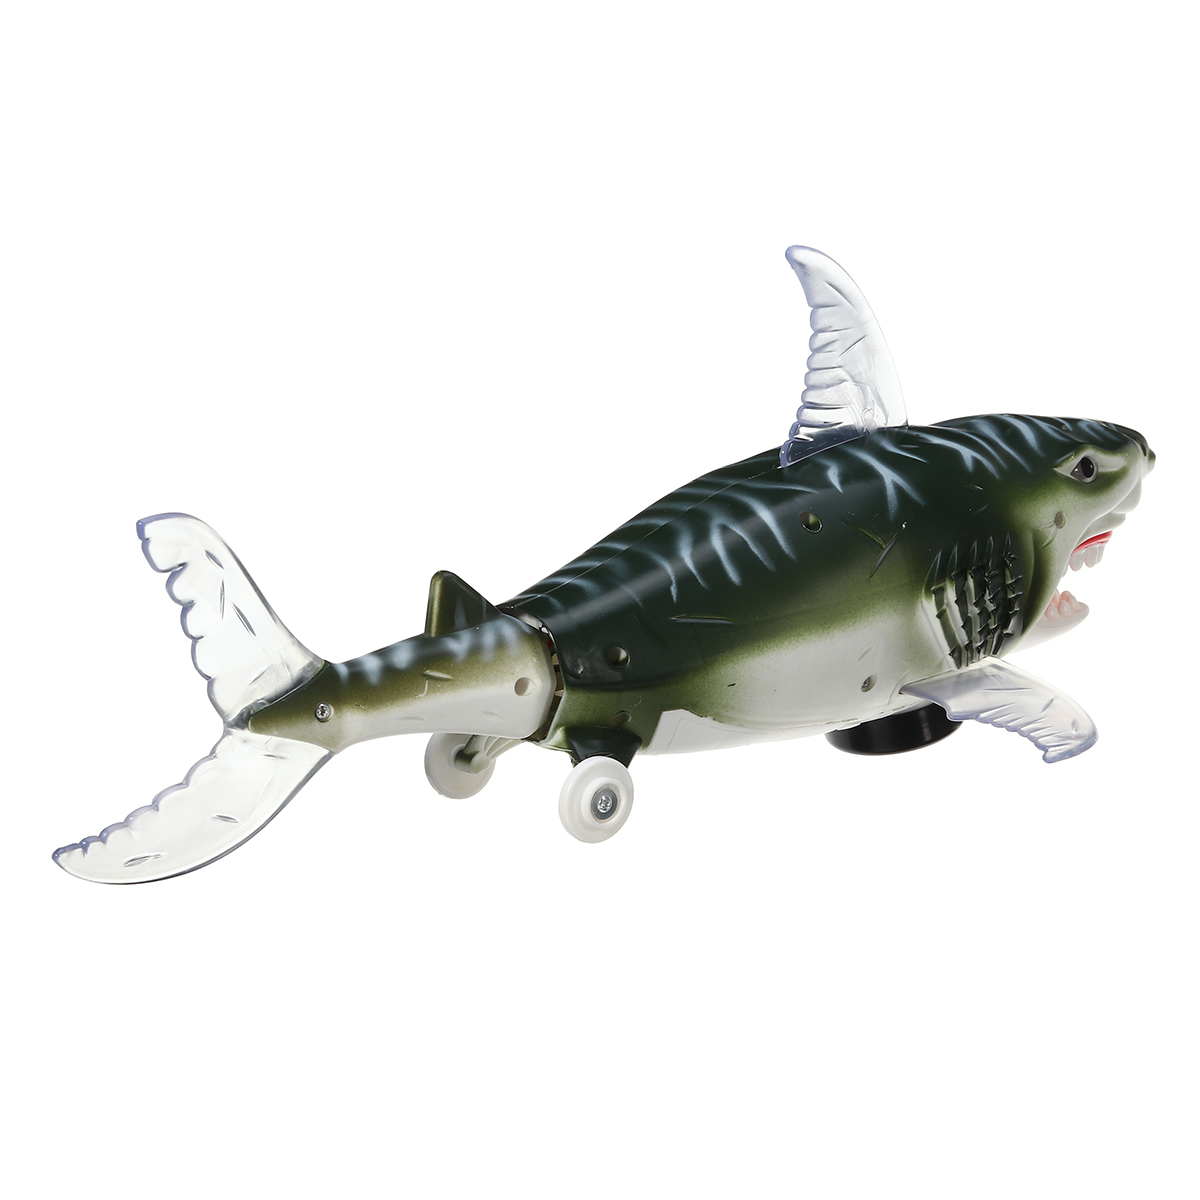 Electric-Projection-Light-Sound-Shark-Walking-Animal-Educational-Toys-for-Kids-Gift-1678213-5